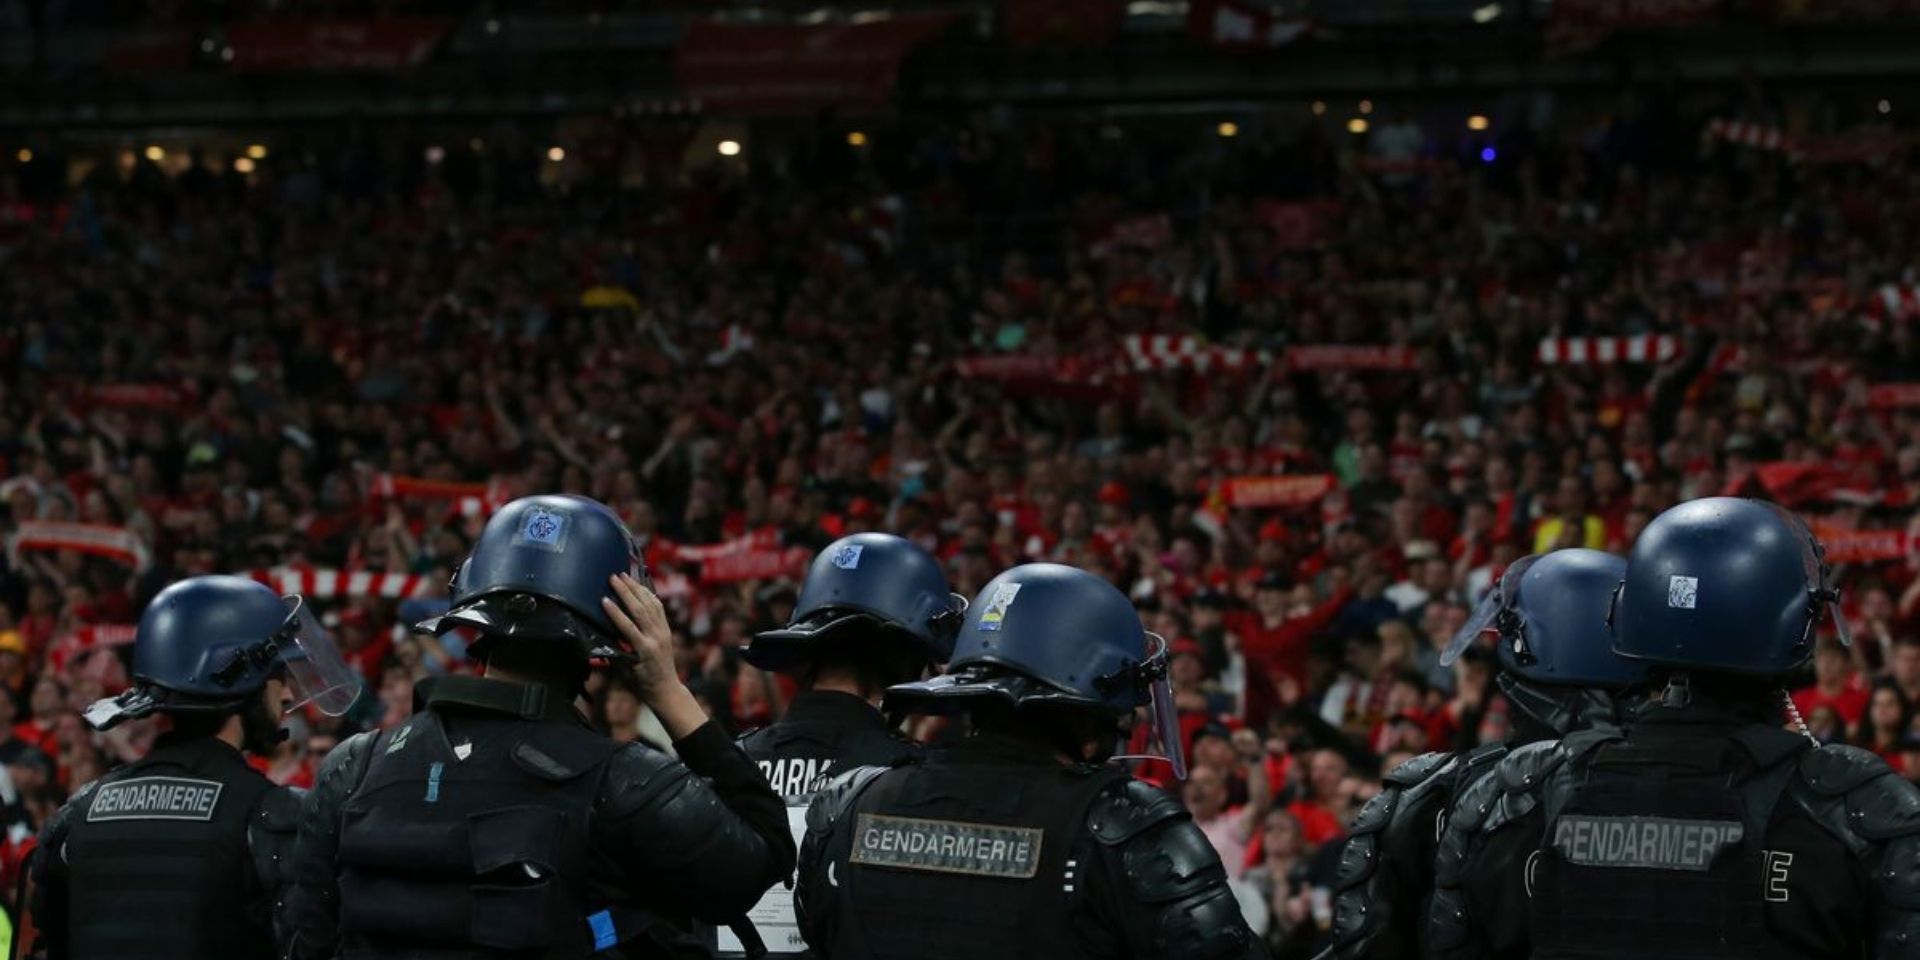 Paris chief of police Didier Lallement is set to be removed from his job following Champions League final debacle